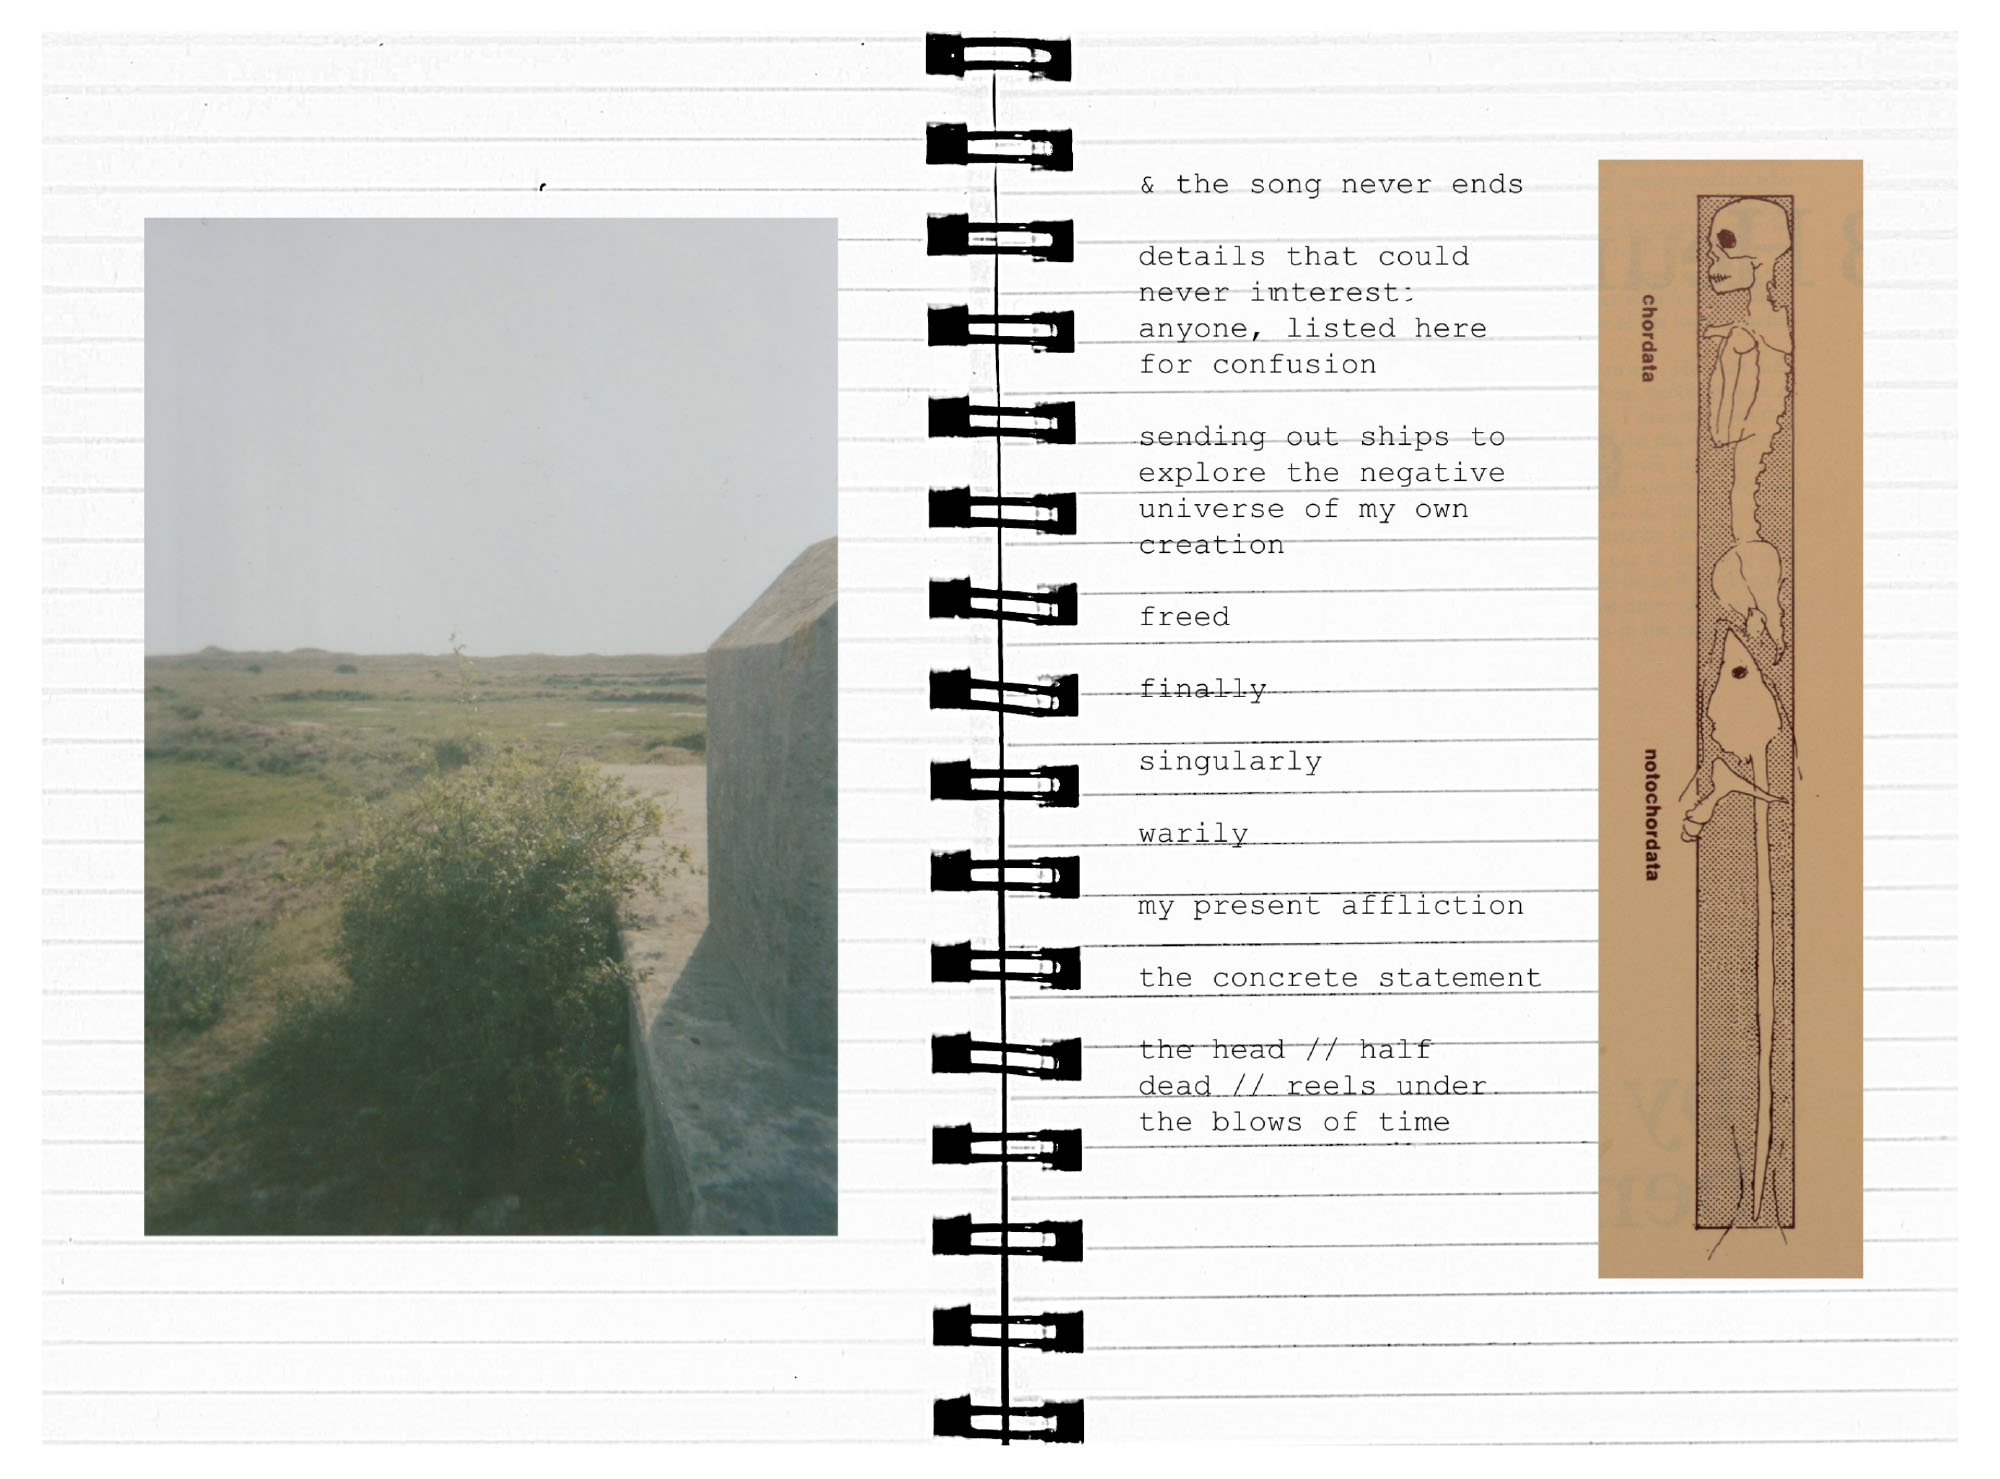 exmouth_scrapbook_notes_on_utopia_final_version-20